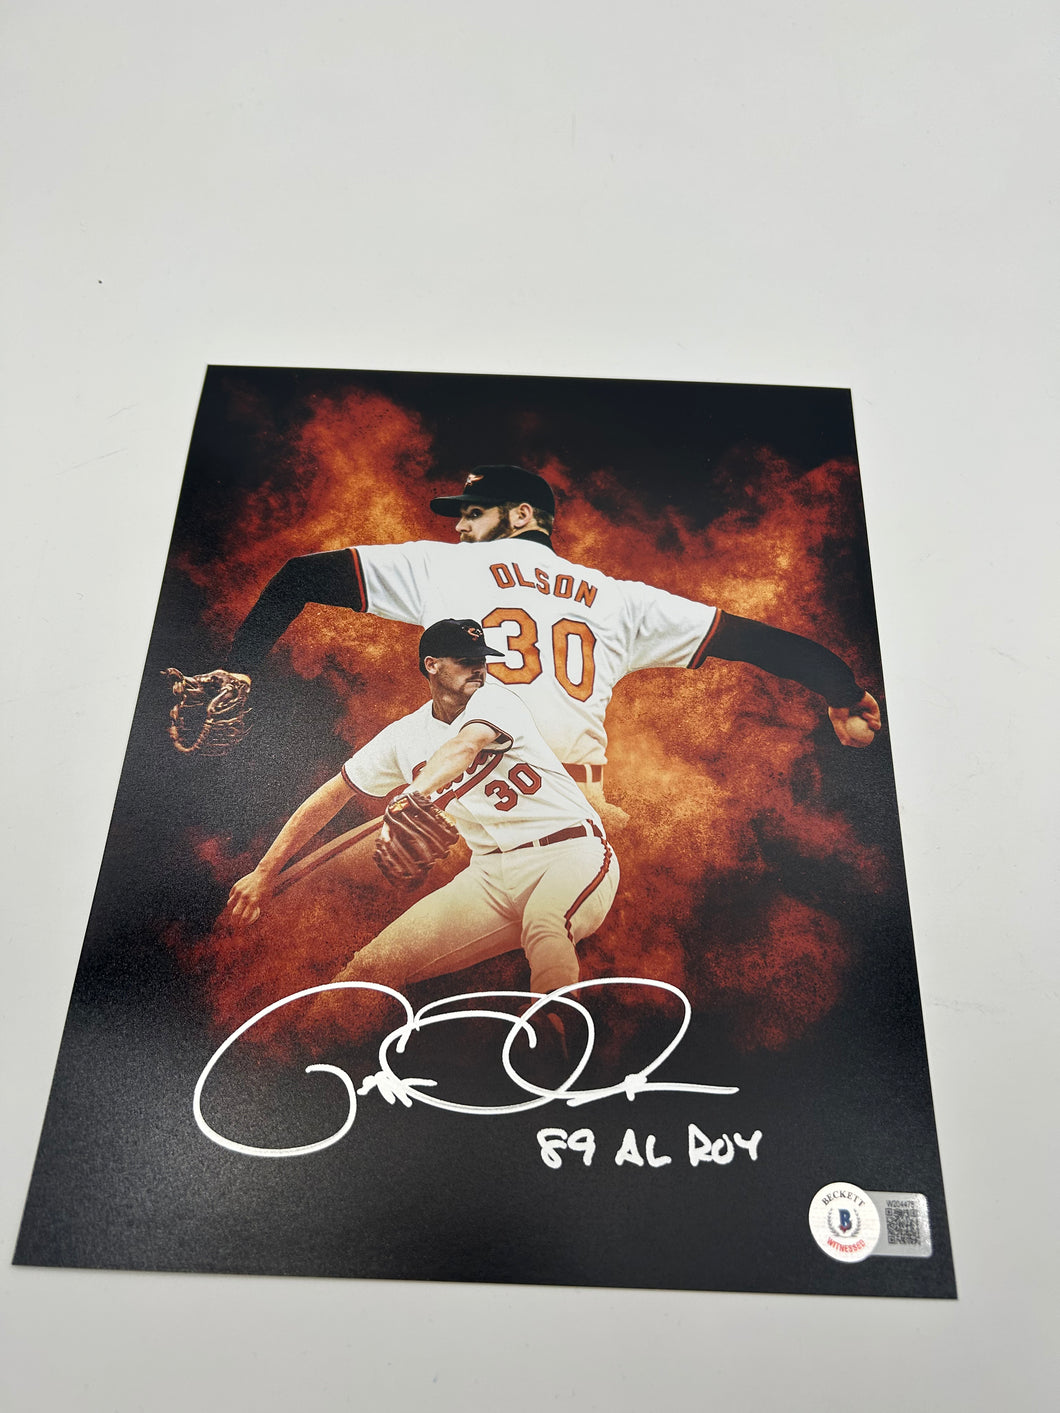 Gregg Olson signed 11x14 rookie of year